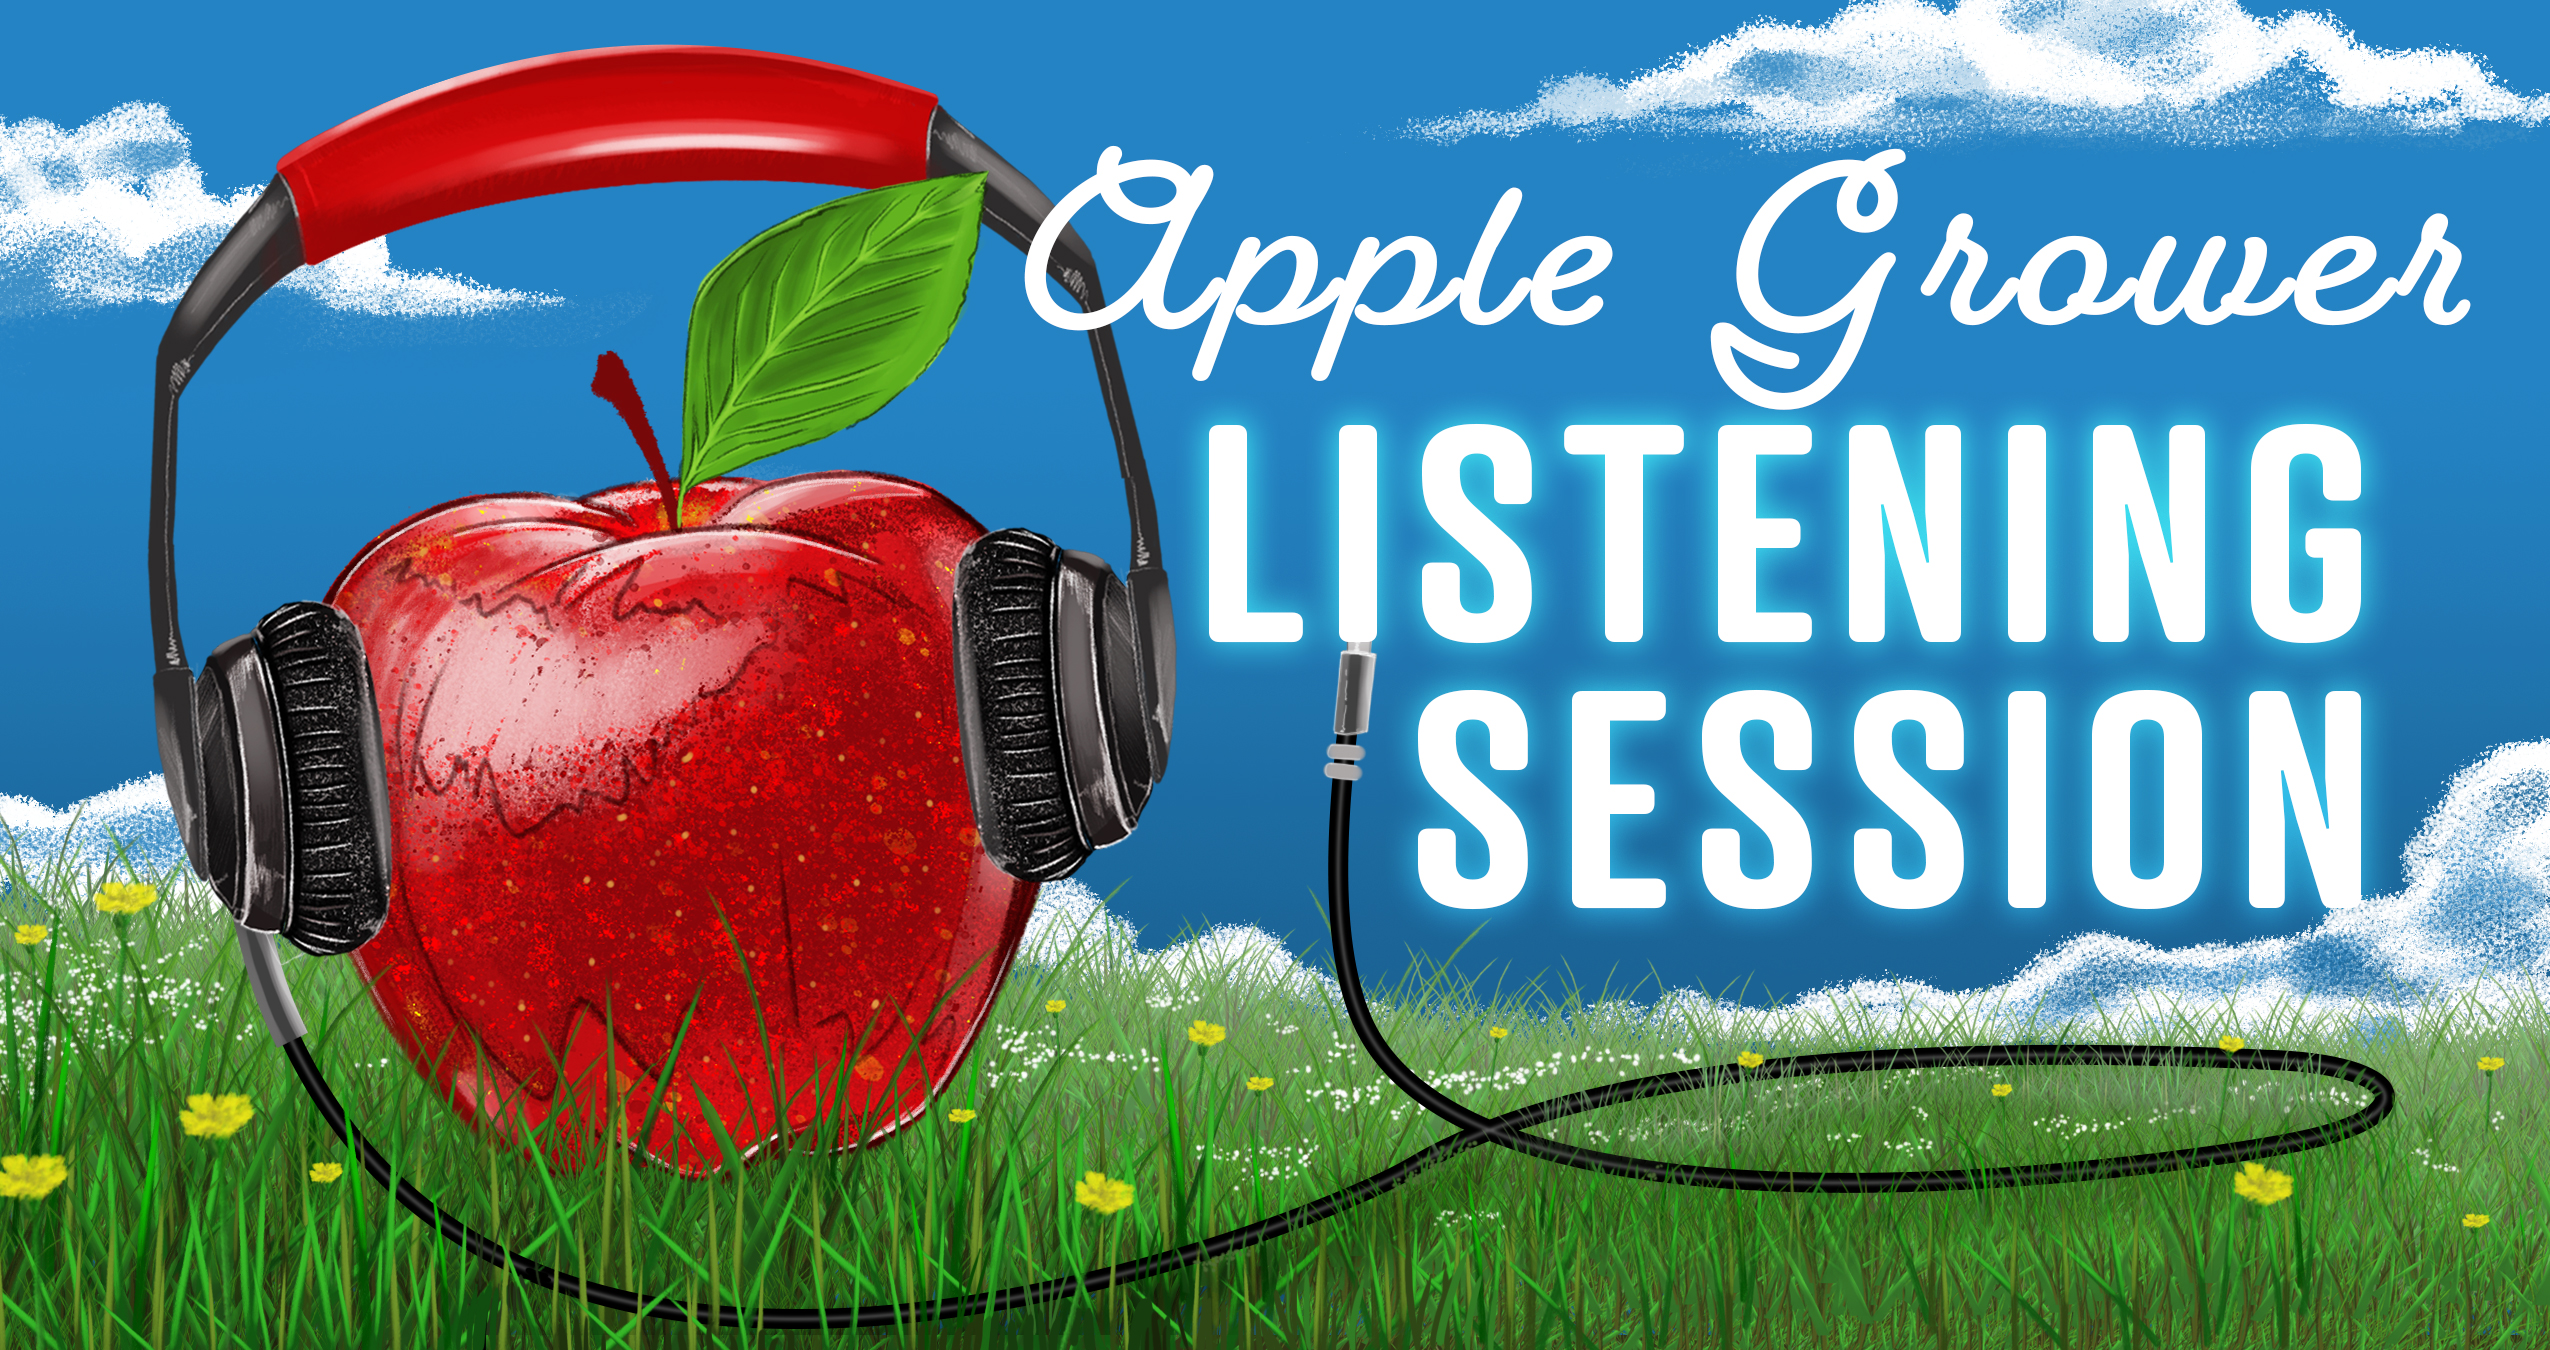 Illustrated red apple with headphones